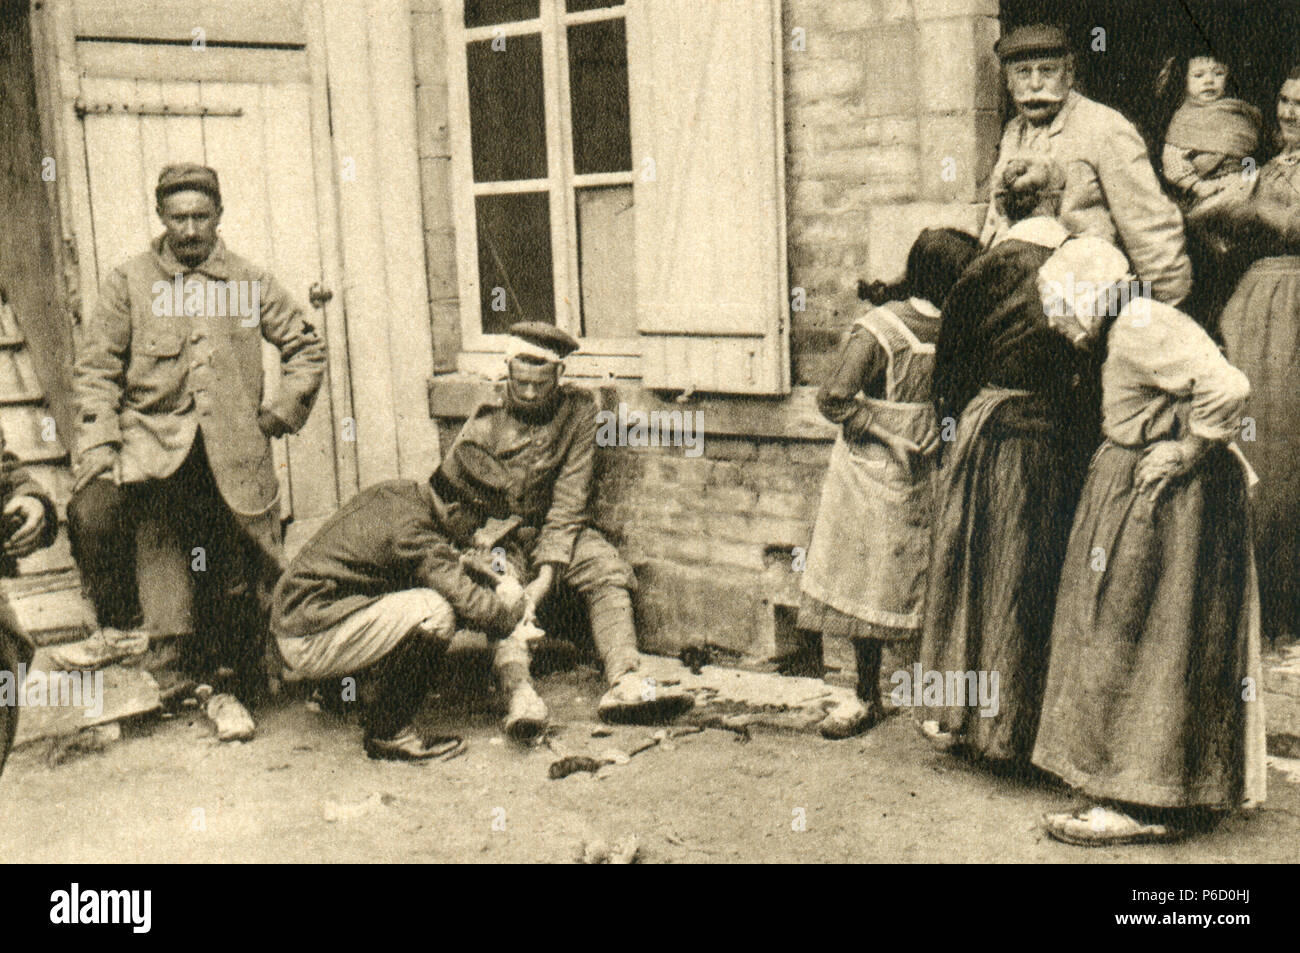 world war i, prisoners of war, German soldier, wounded people, ww1, wwi, world war one Stock Photo